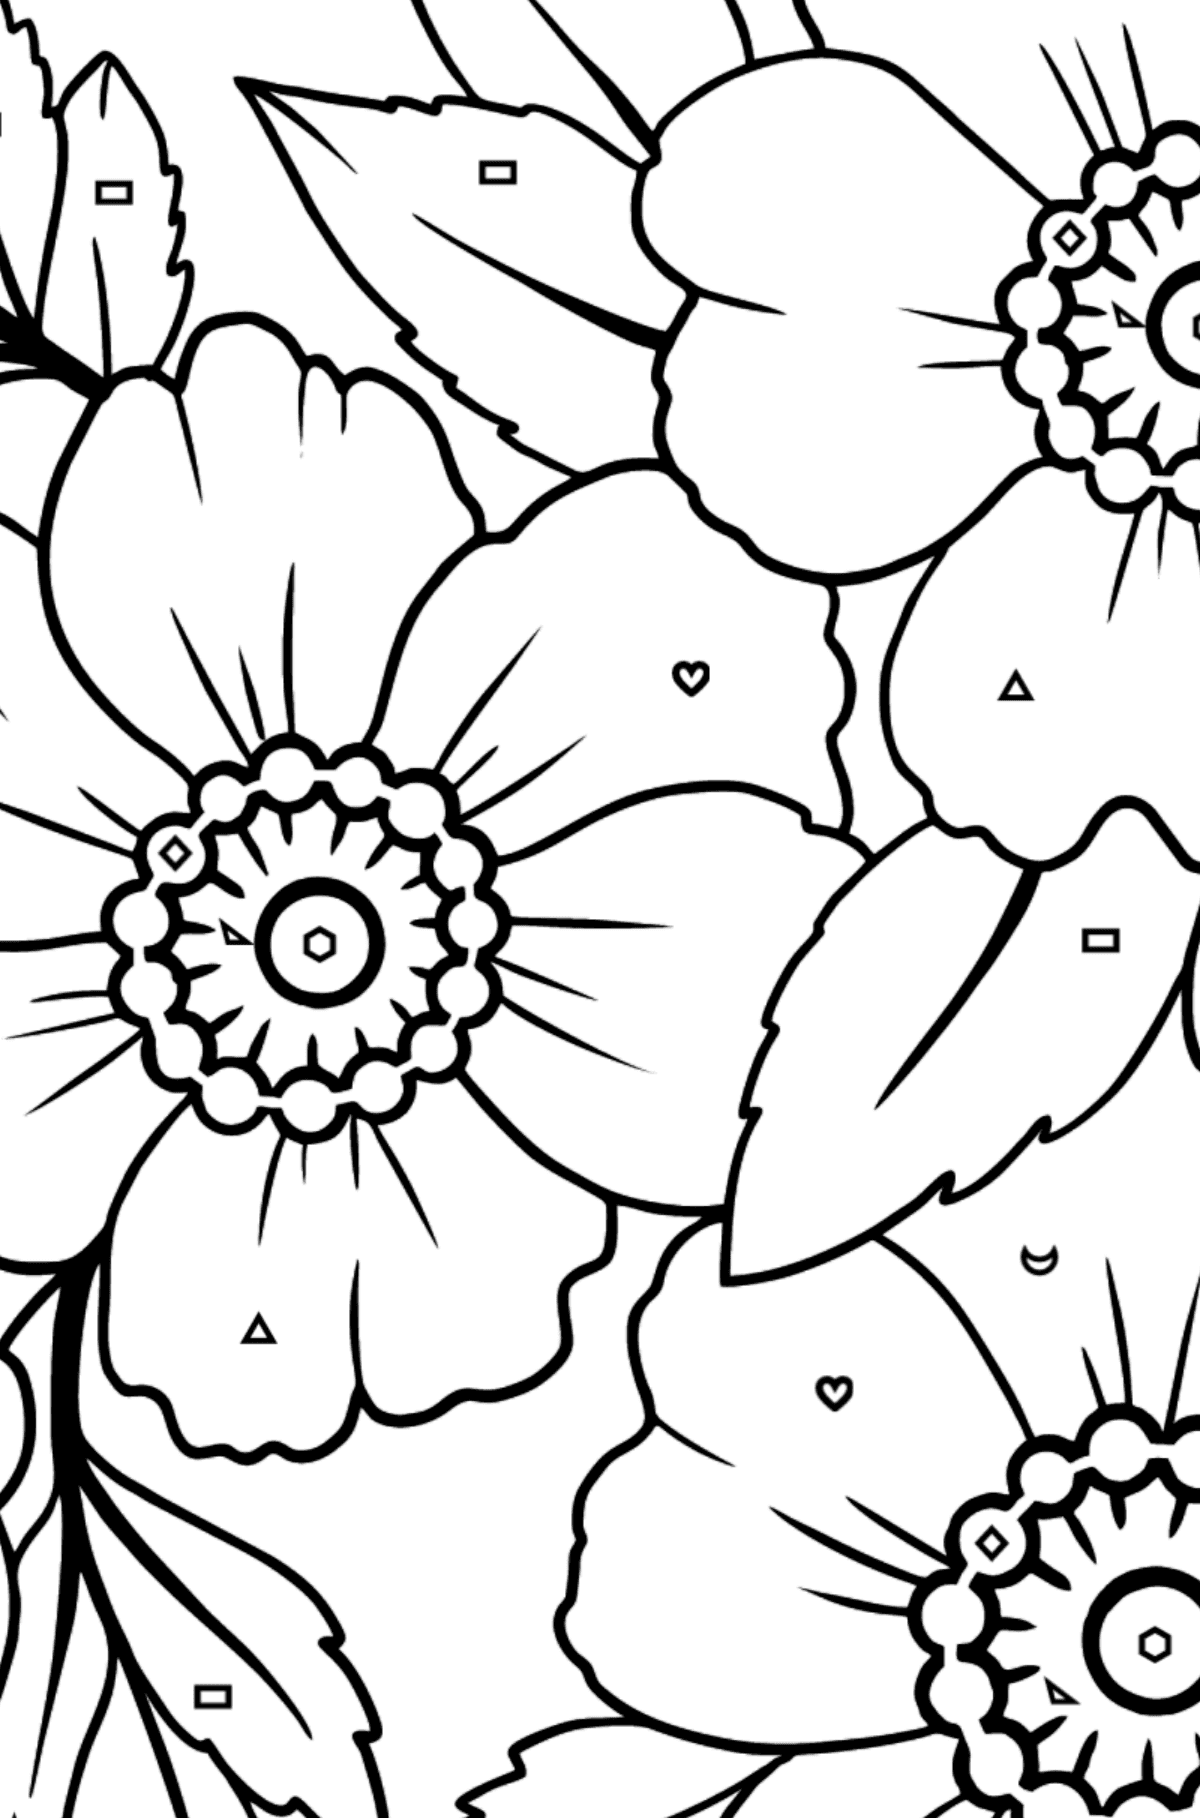 Flower Coloring Page - Japanese Anemone - Coloring by Geometric Shapes for Kids